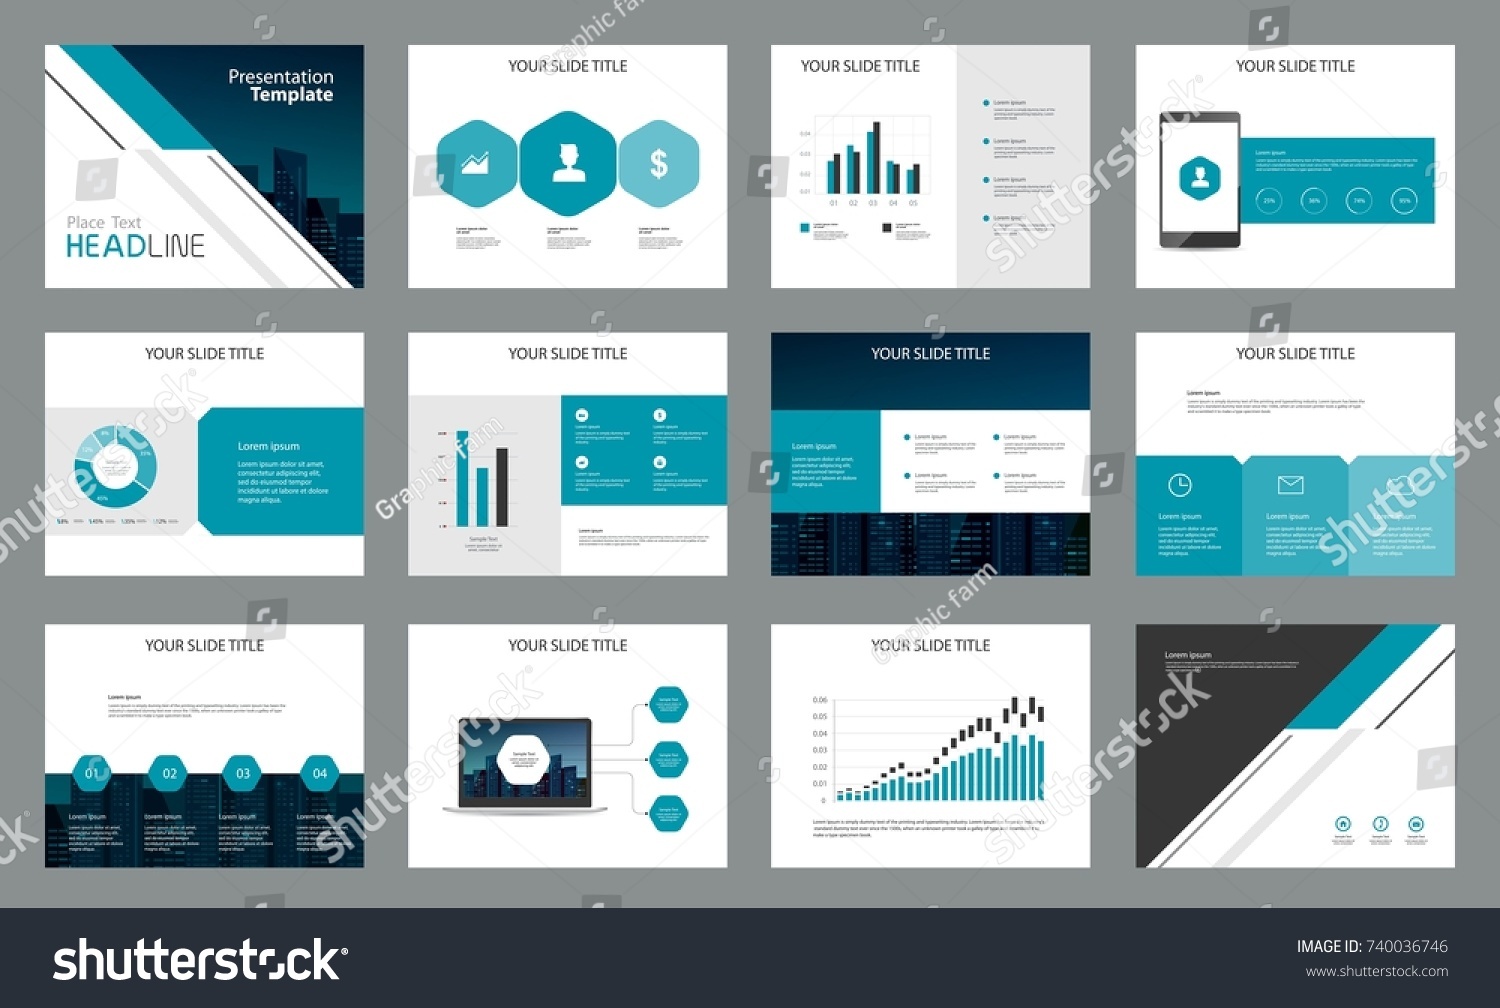 Business Presentation Template from image.shutterstock.com